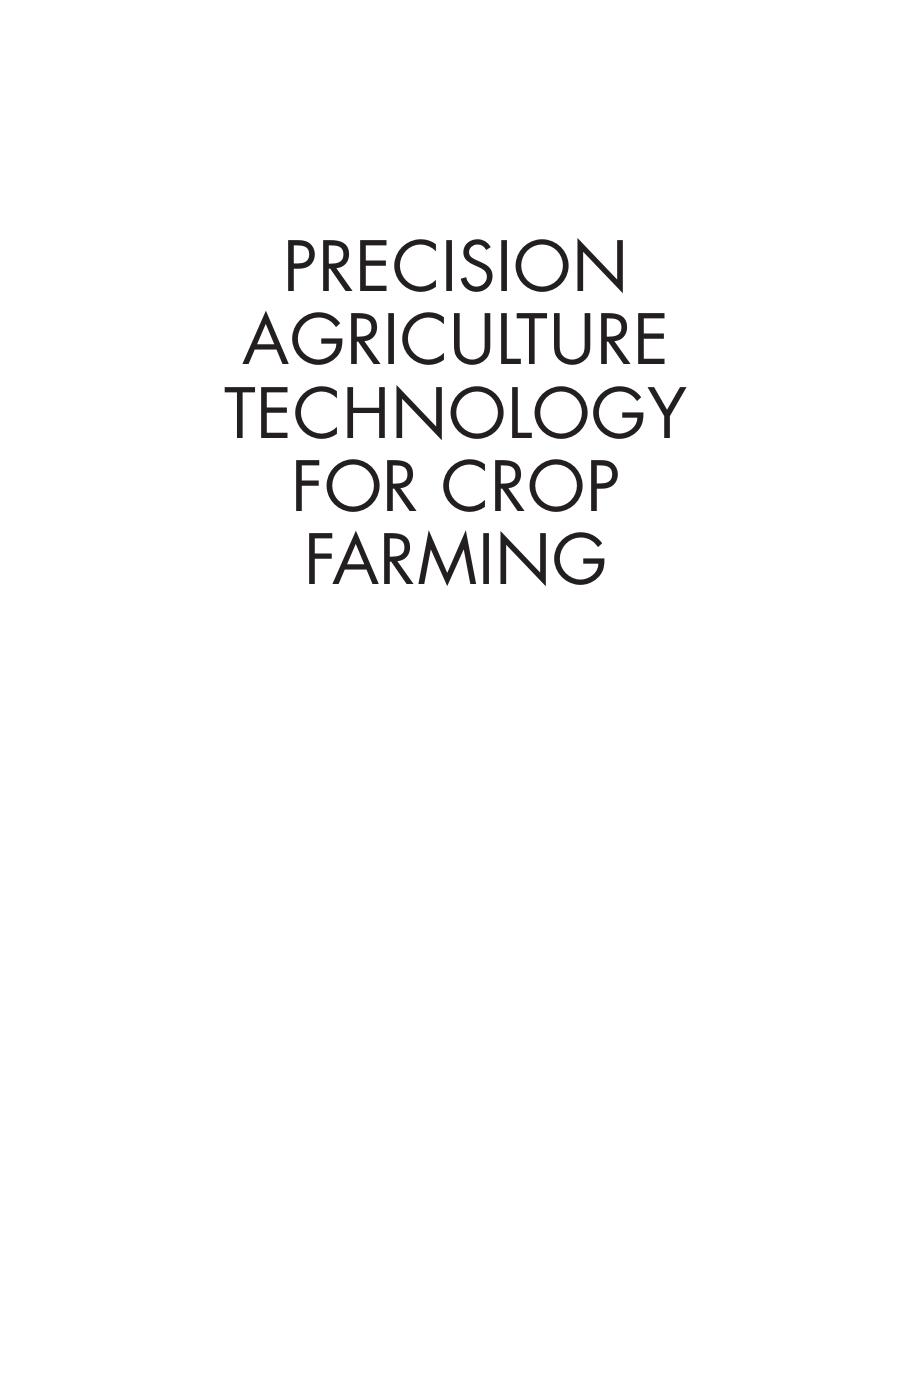 Precision agriculture technology for crop farming    2016